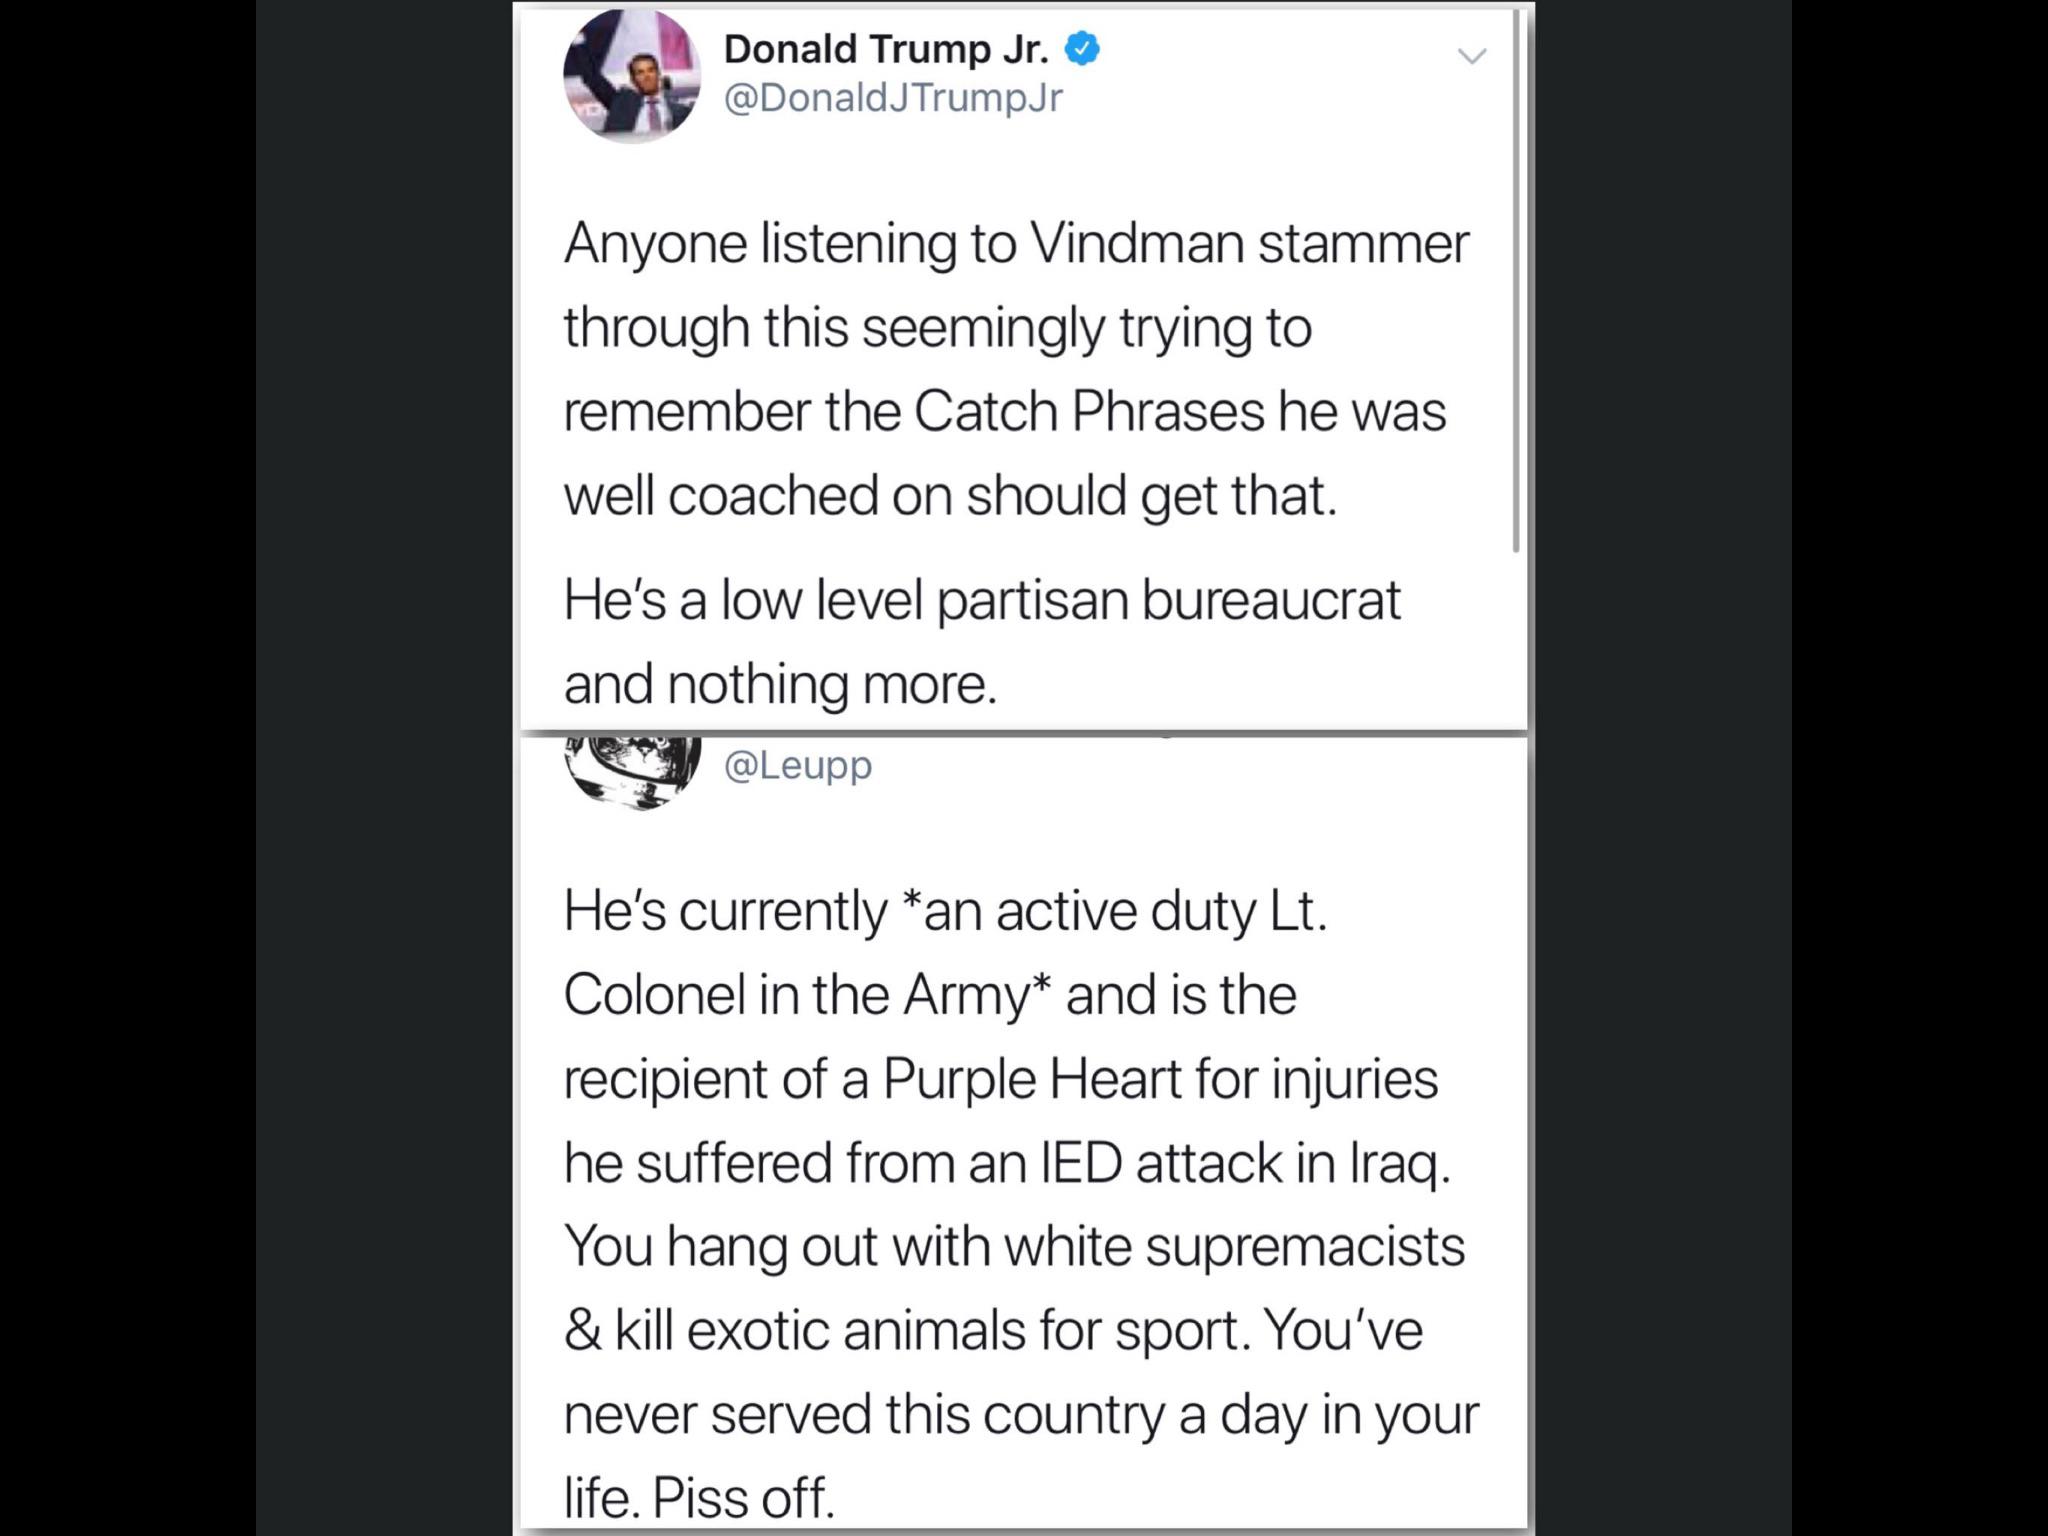 political political-memes political text: Donald Trump Jr. e @DonaldJTrumpJr Anyone listening to Vindman stammer through this seemingly trying to remember the Catch Phrases he was well coached on should get that. He's a low level partisan bureaucrat and nothing more. @Leupp He's currently *an active duty Lt. Colonel in the Army* and is the recipient of a Purple Heart for injuries he suffered from an IED attack in Iraq. You hang out with white supremacists & kill exotic animals for sport. You've never served this country a day in your life. Piss off. 